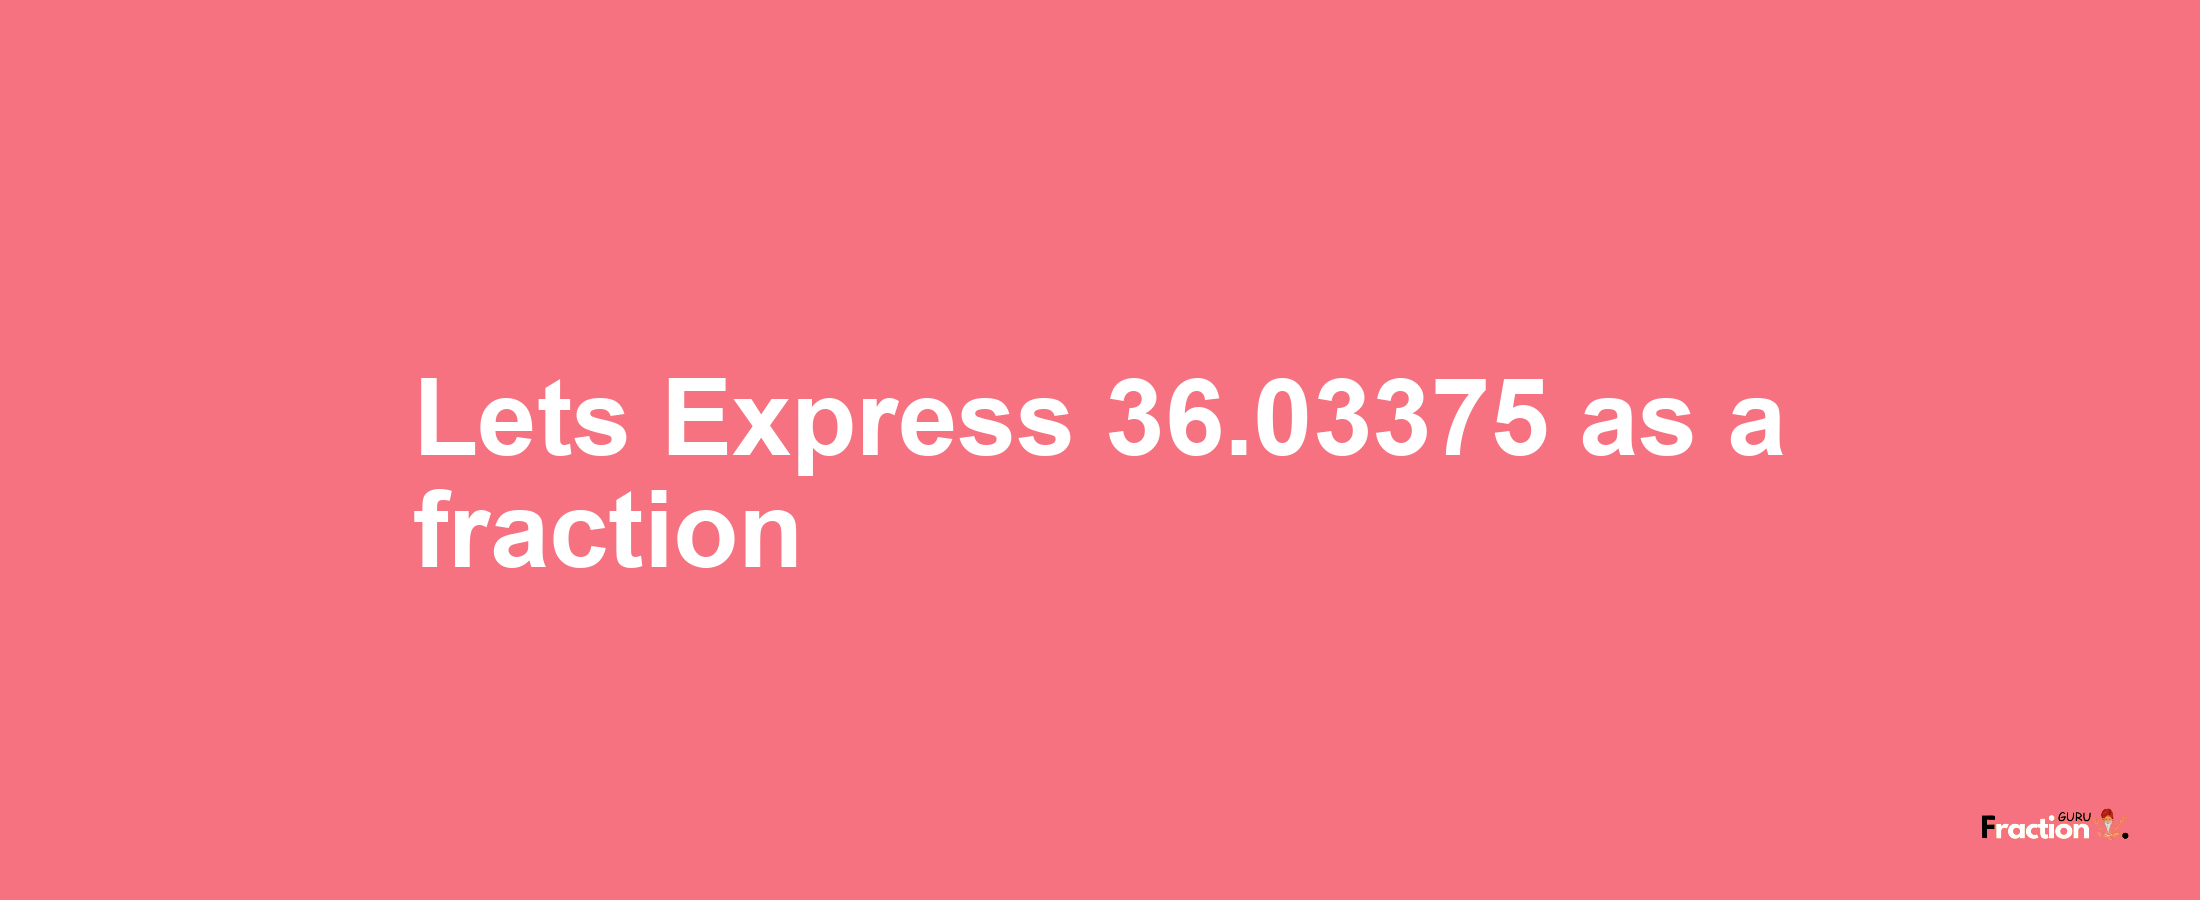 Lets Express 36.03375 as afraction